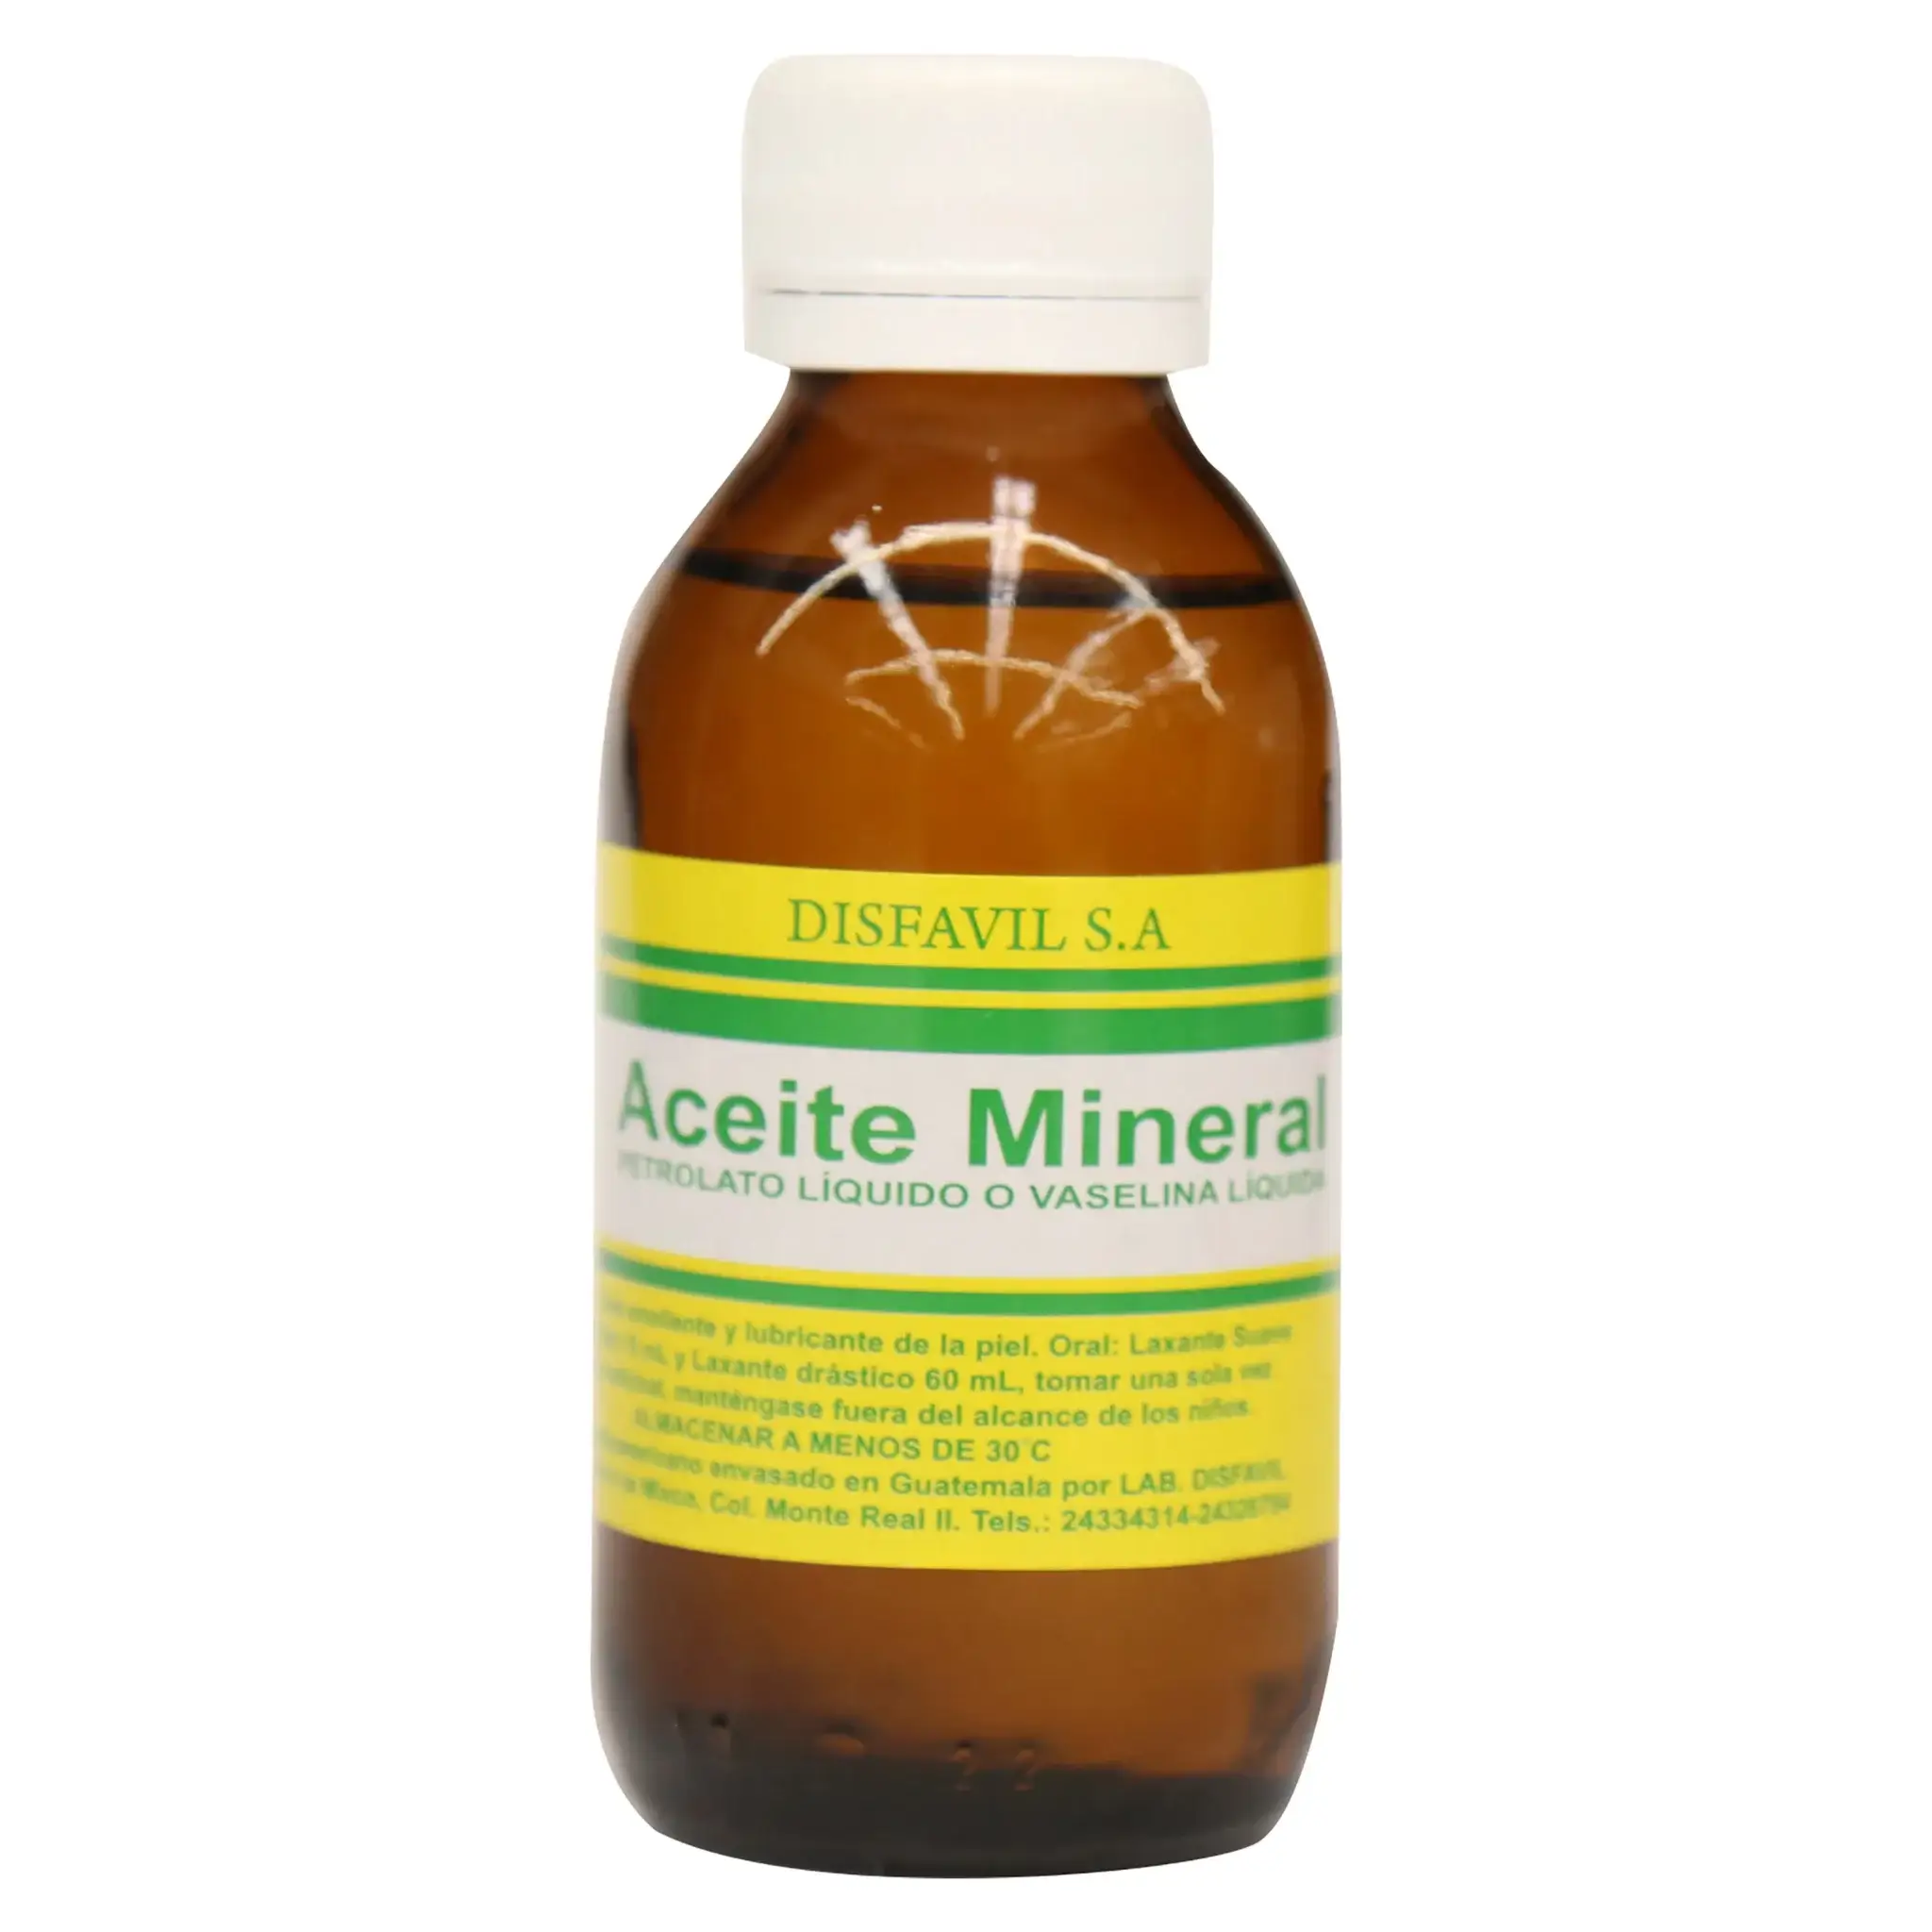 ACEITE MINERAL